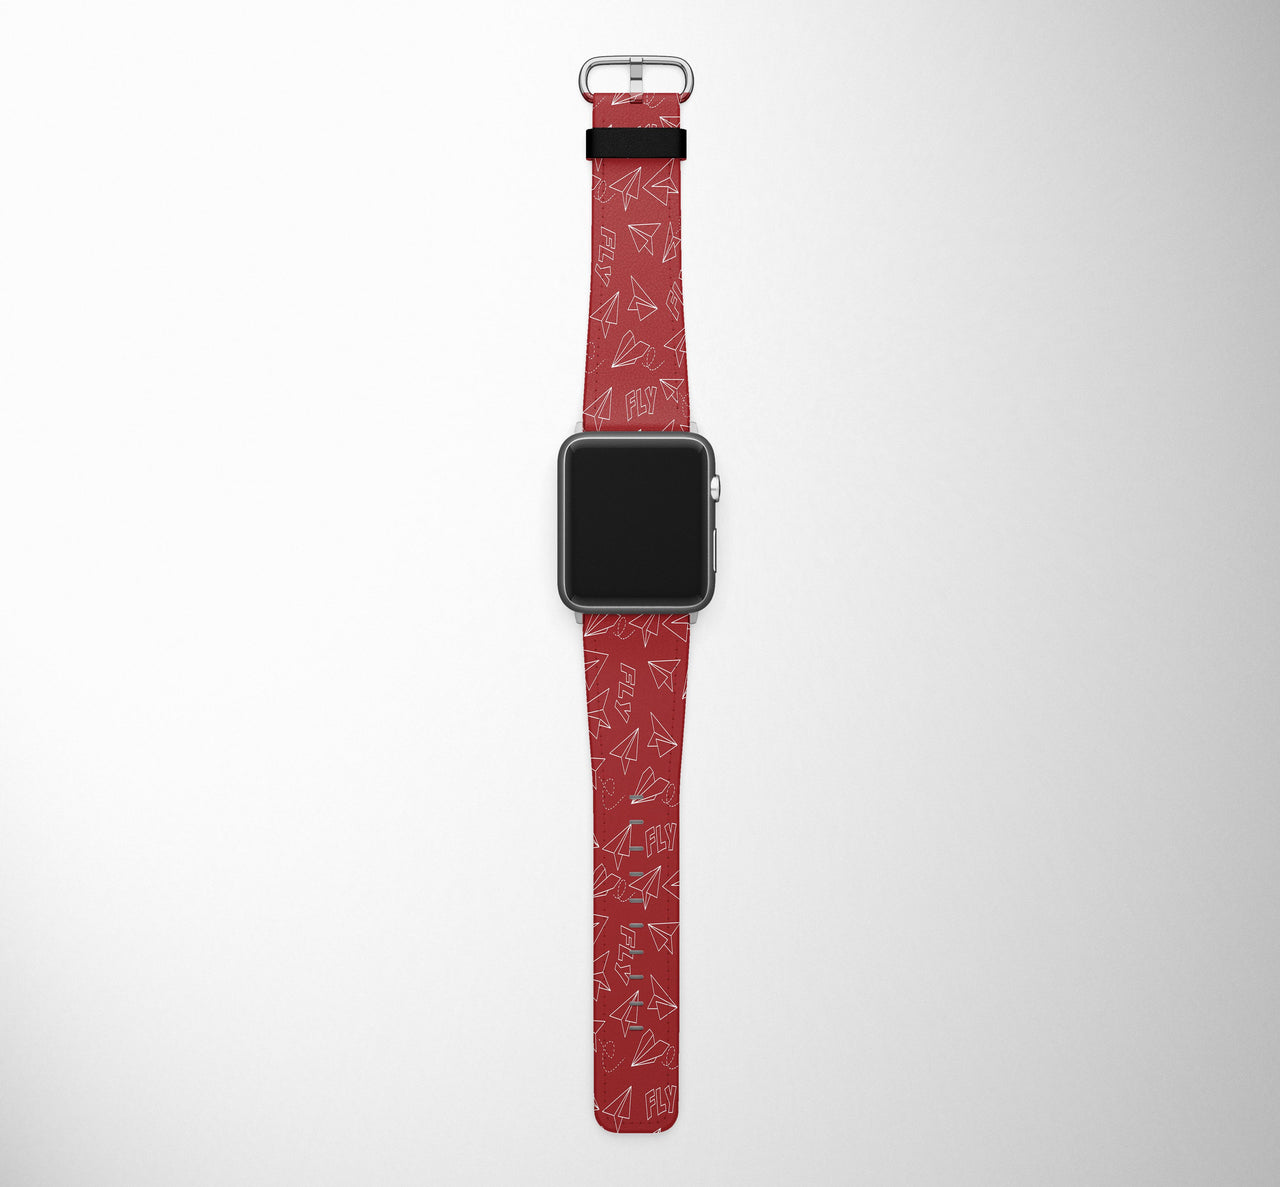 Paper Airplane & Fly (Red) Designed Leather Apple Watch Straps